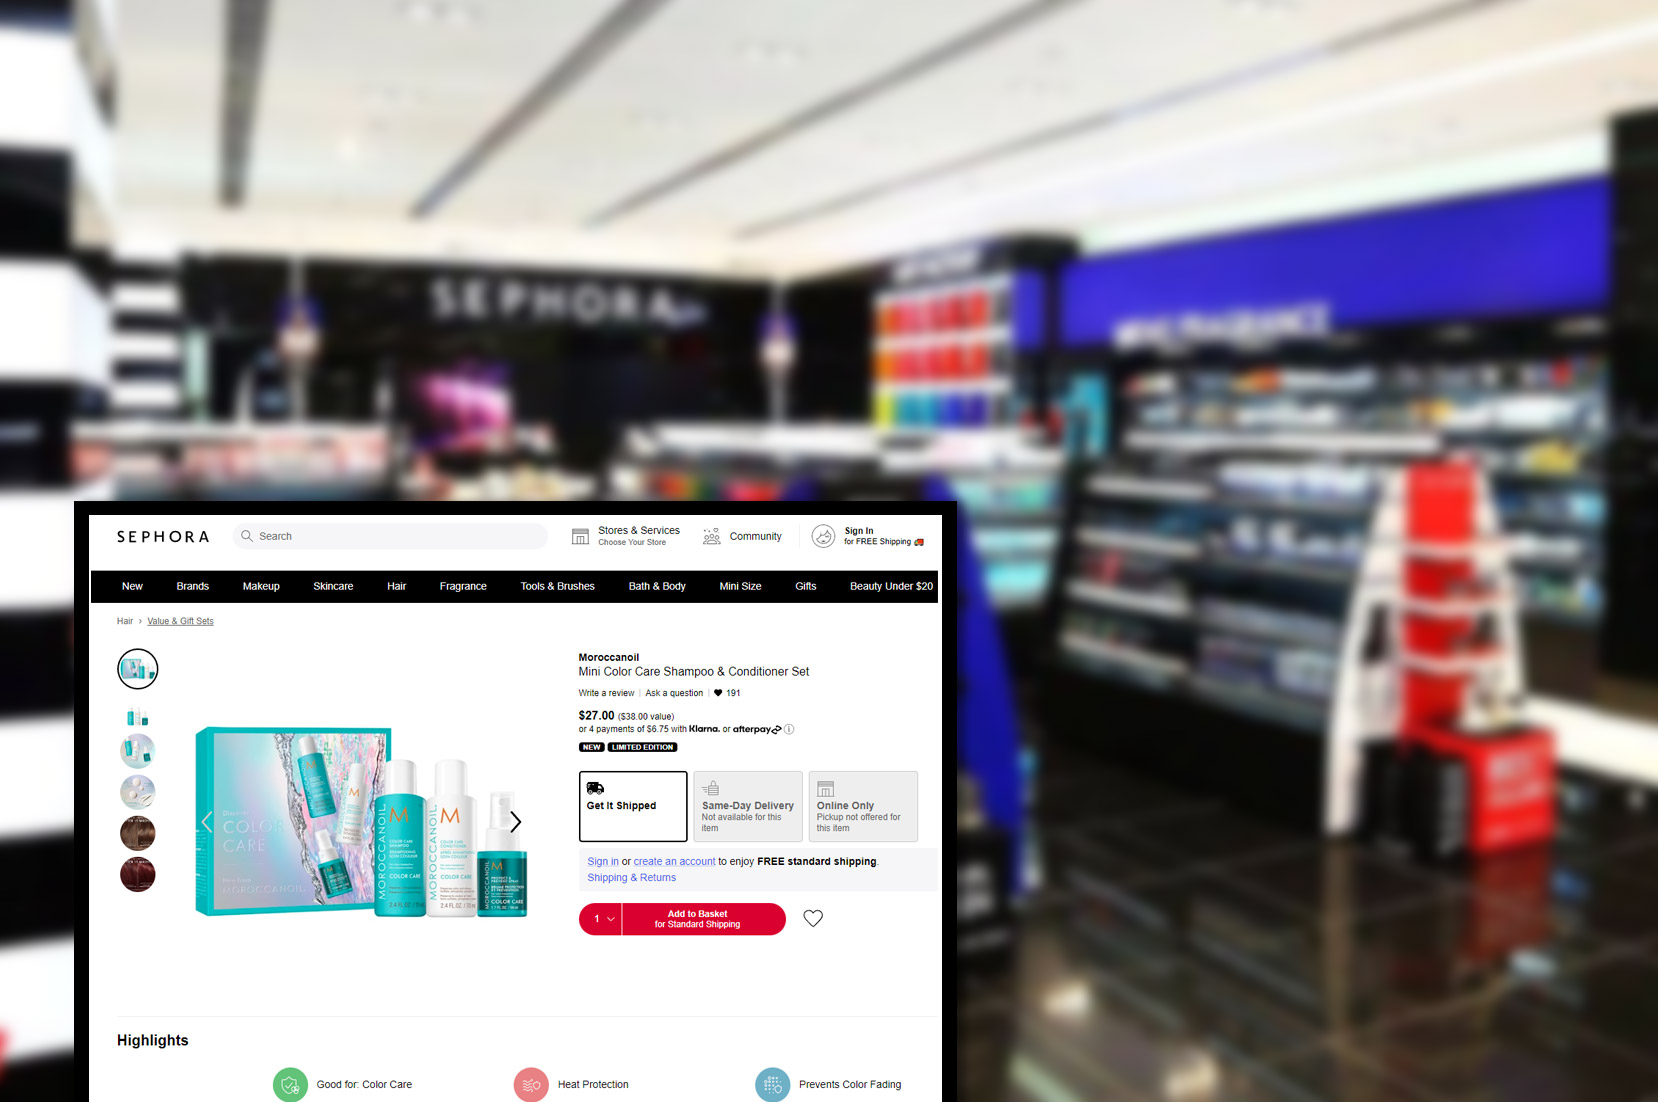 sephora-comproduct-pricing-information-and-image-scraping-services